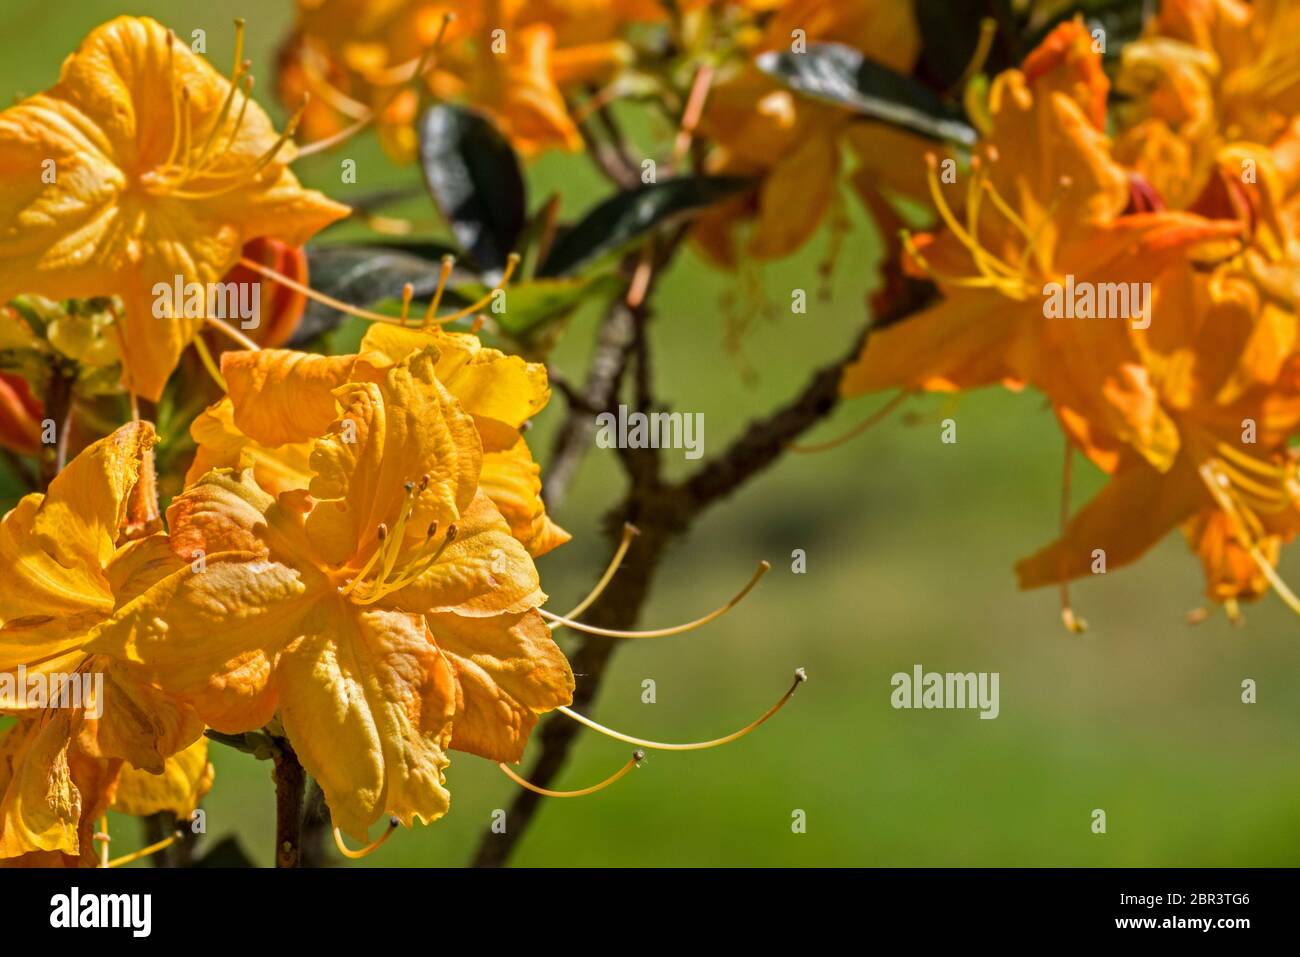 Rhododendron Klondyke cultivar (Azalea mollis), rhododendron species native to China and Japan, close-up of orange flowers in spring Stock Photo